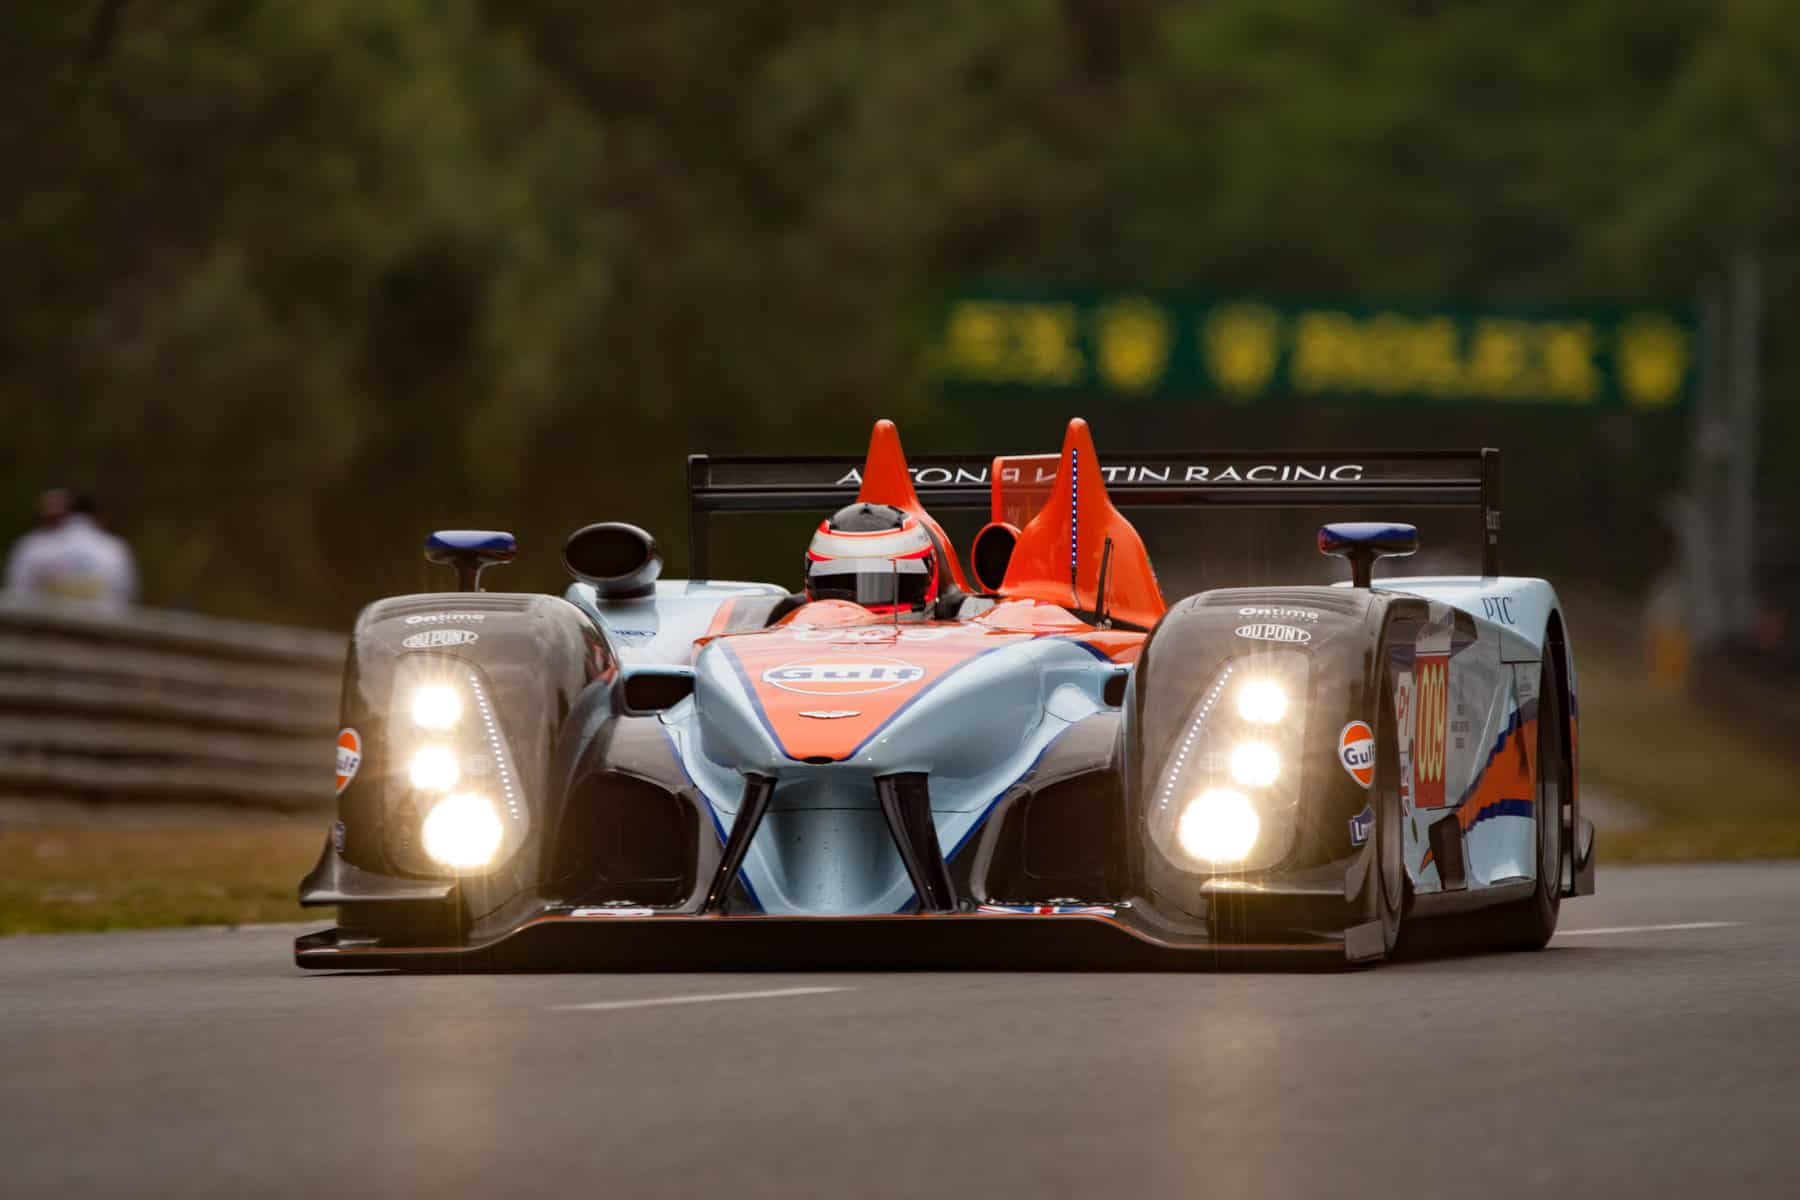 Aston Martin Amr One Lmp1 Wallpapers